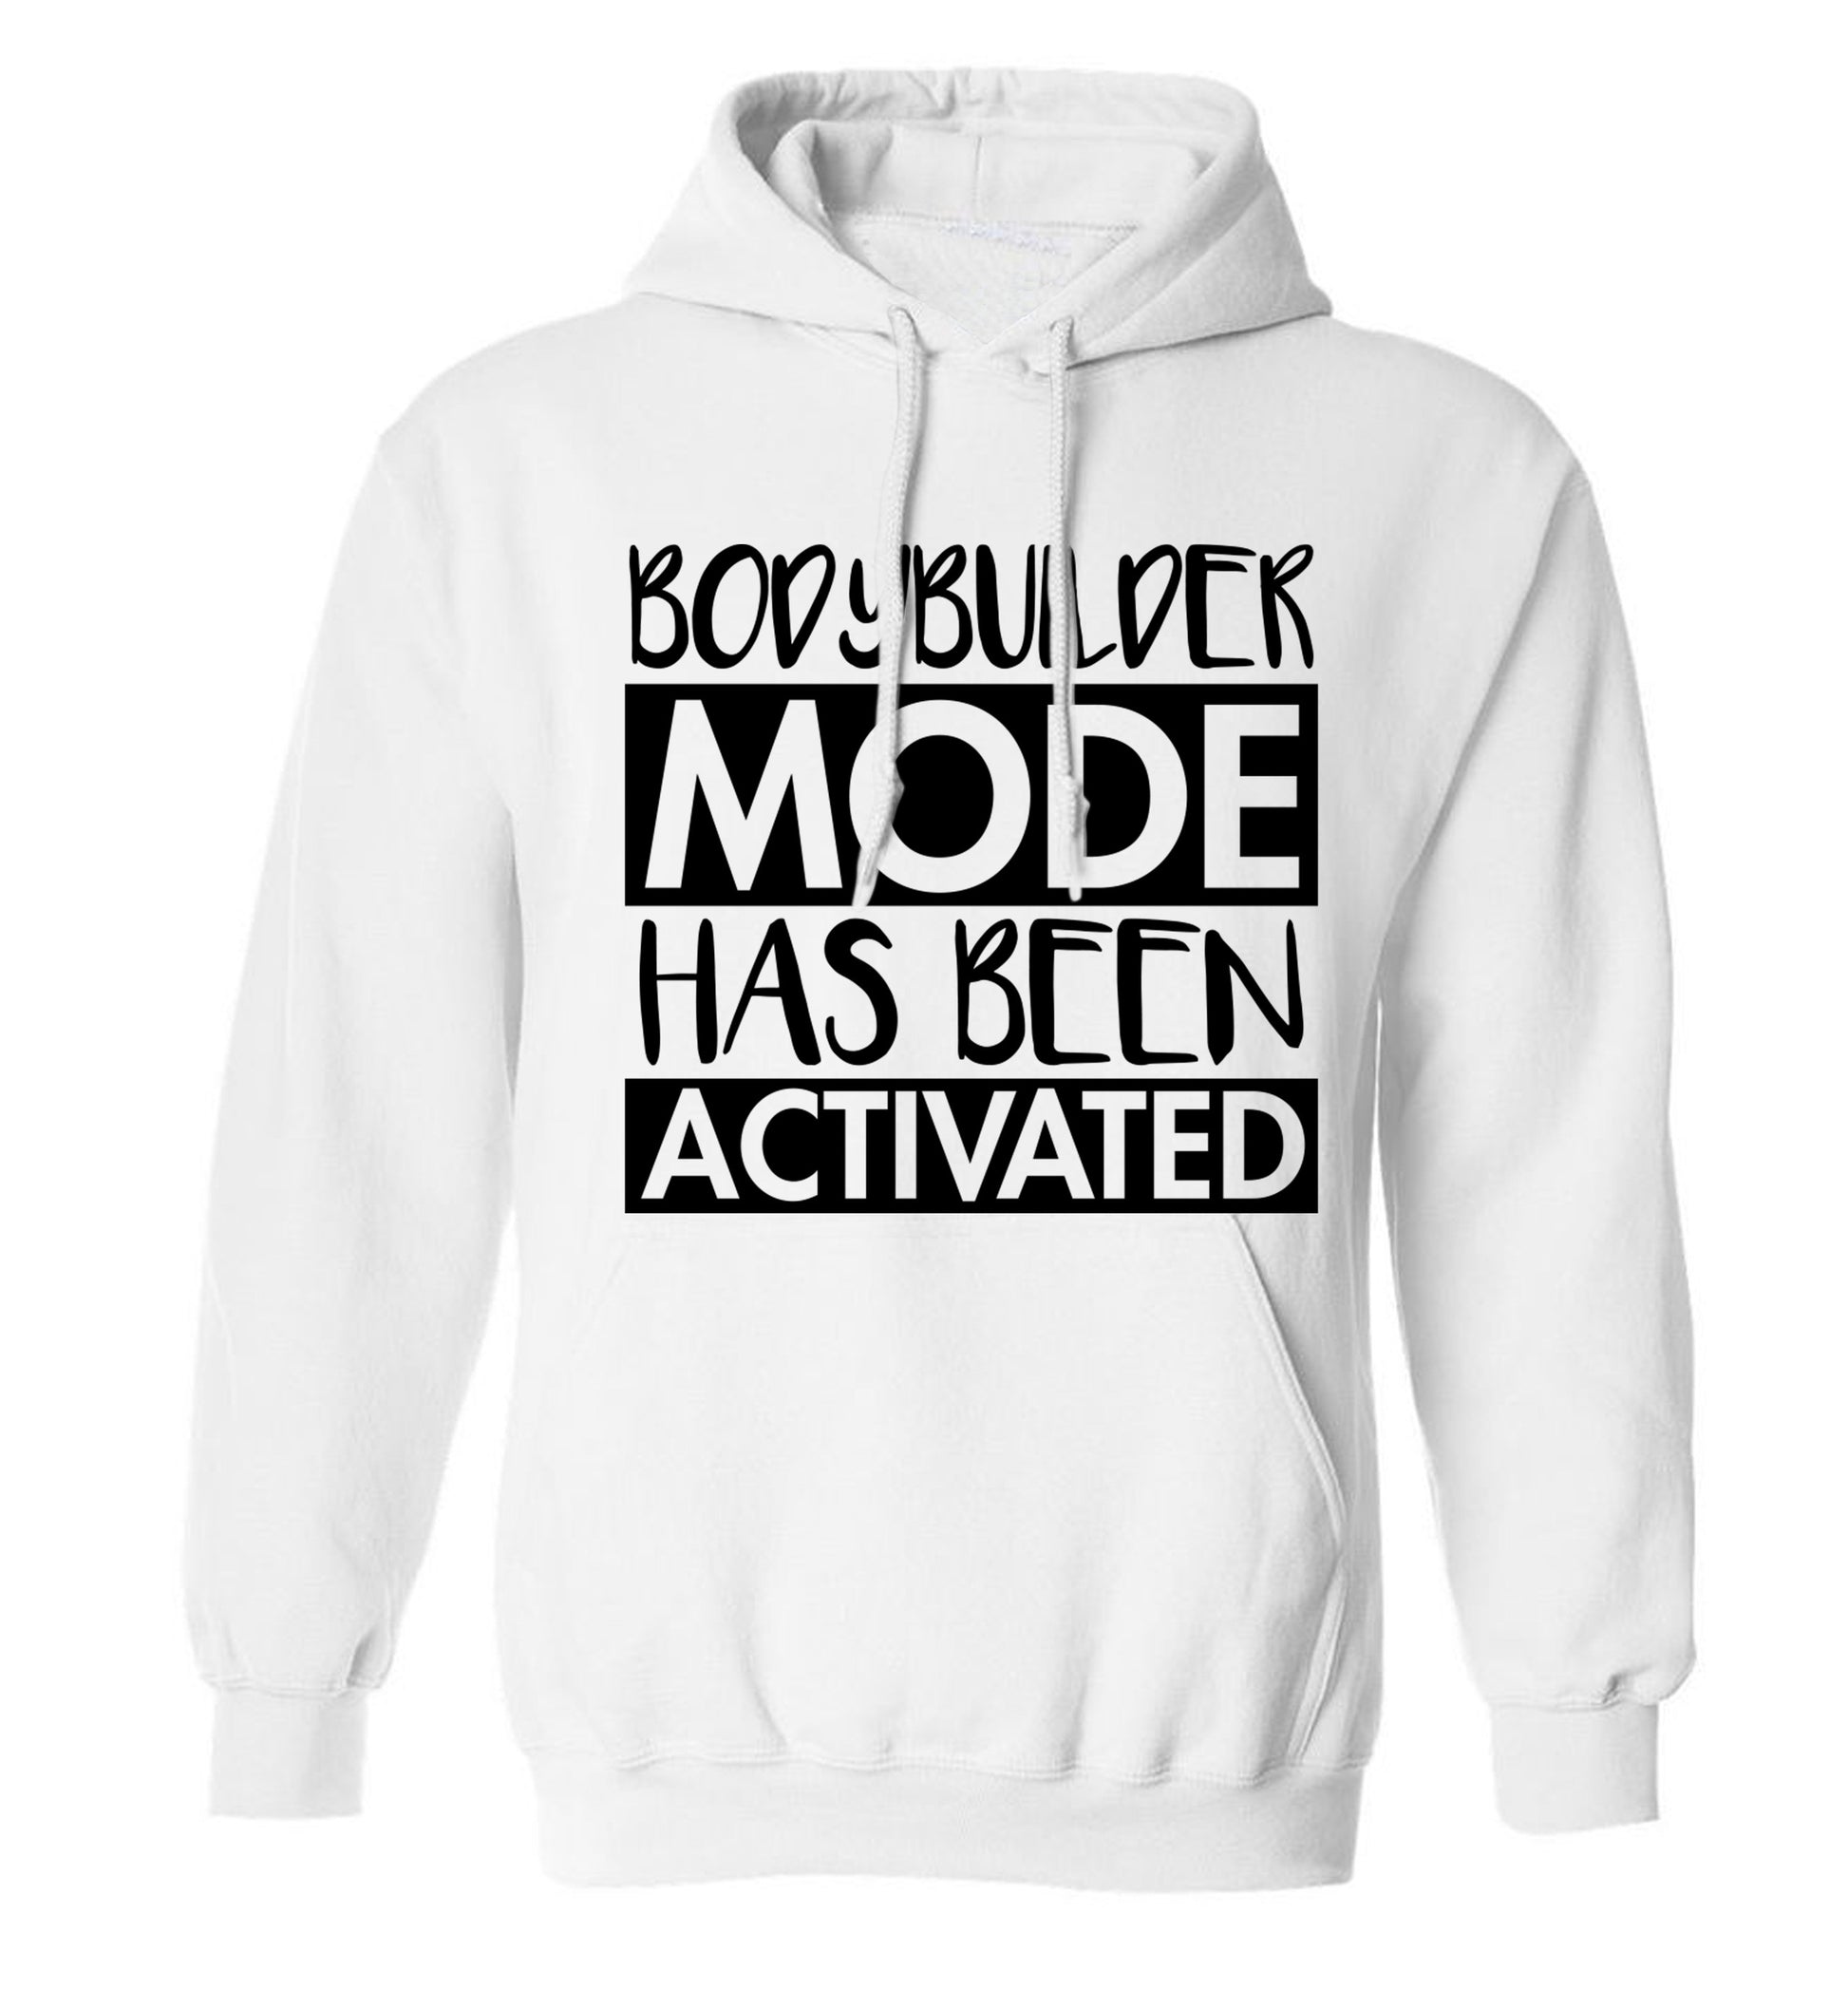 Bodybuilder mode activated adults unisex white hoodie 2XL